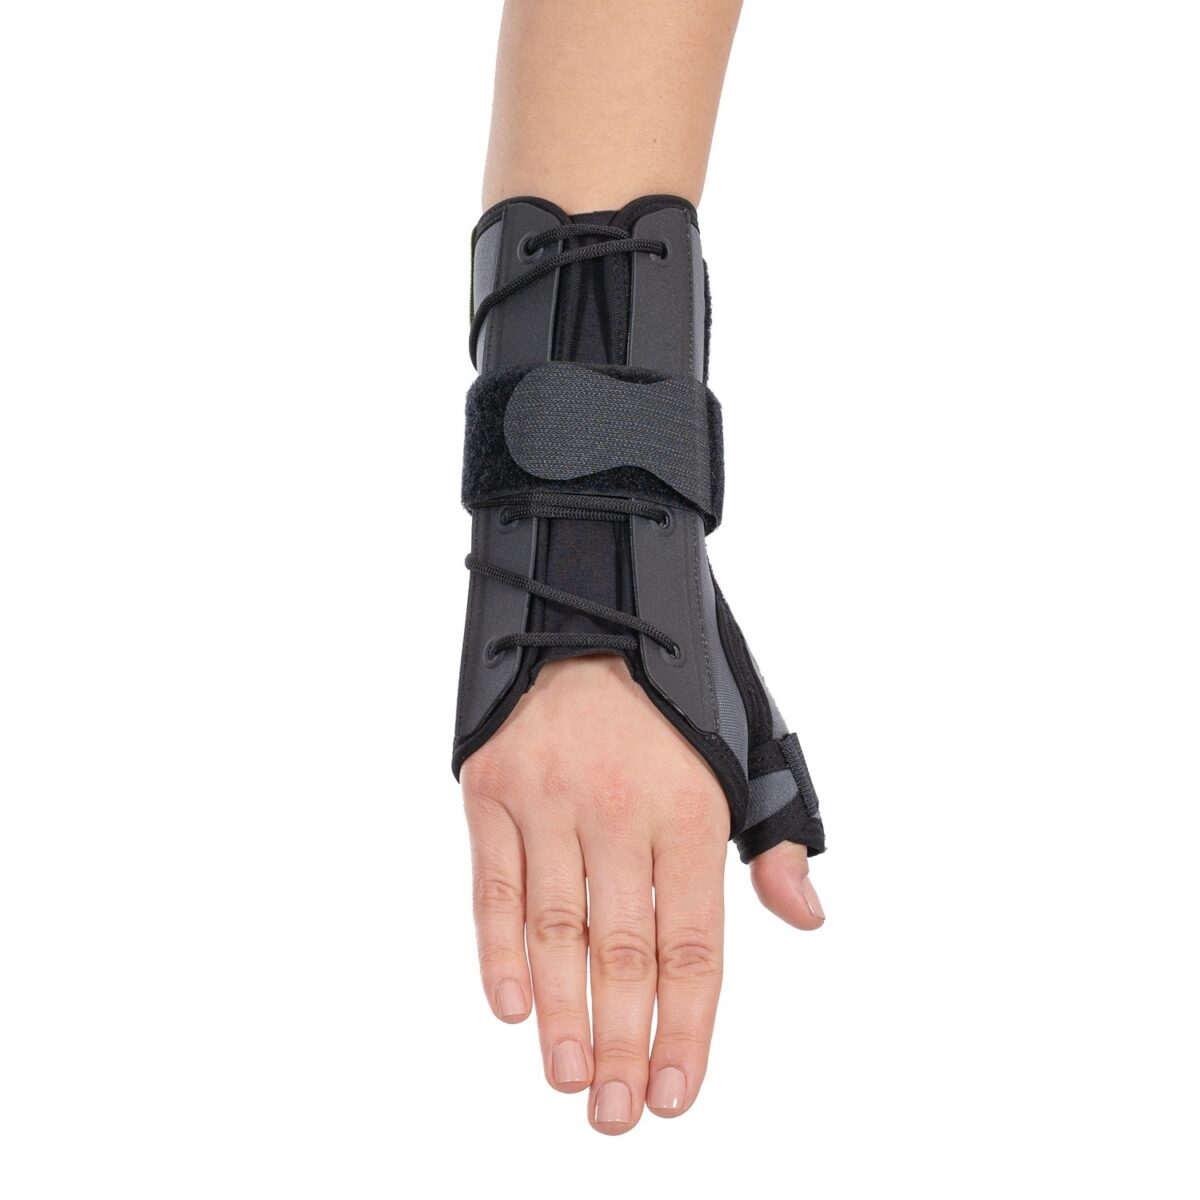 wingmed orthopedic equipments W321 lace up wrist splint with thumb support 88